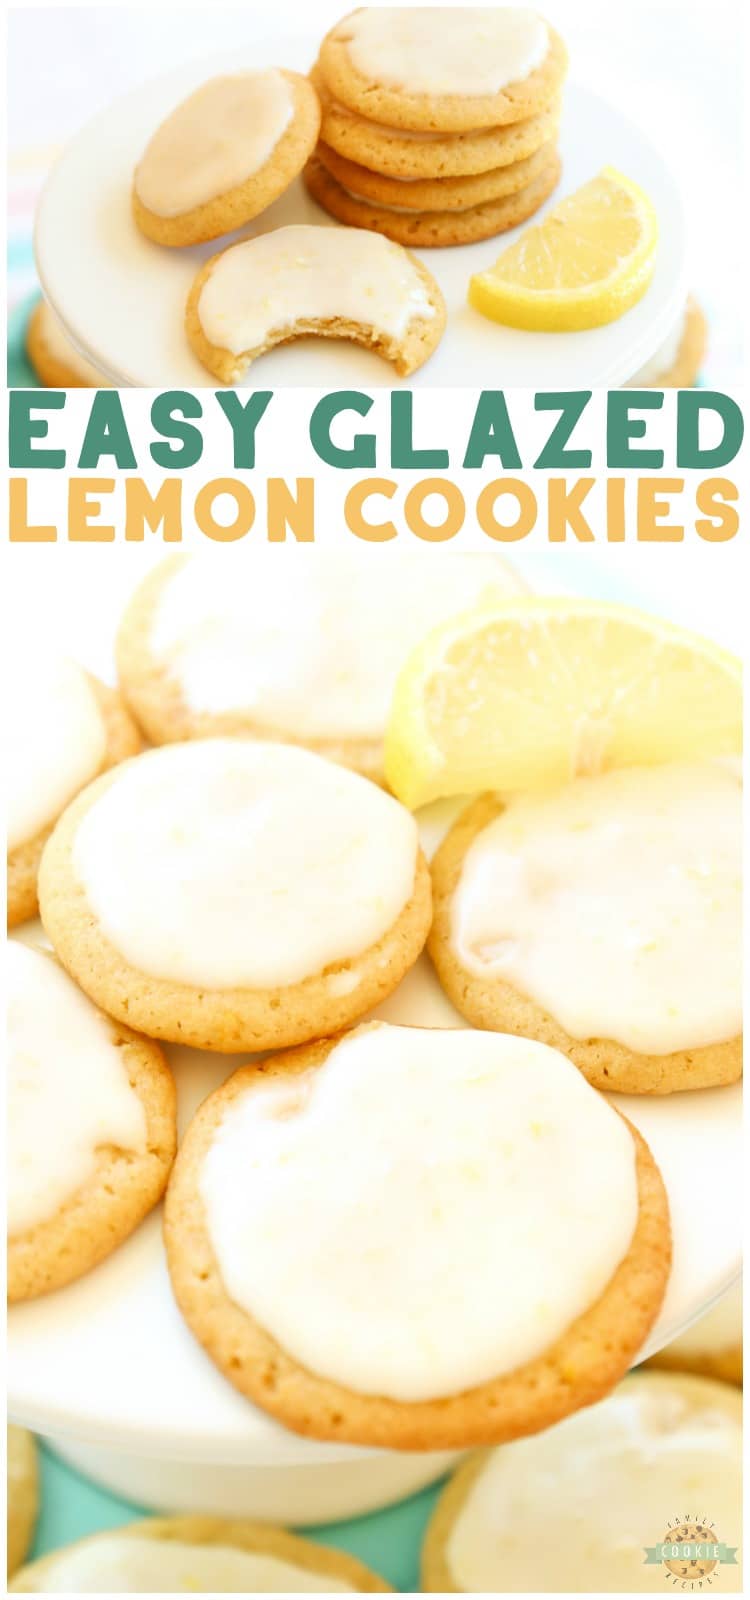 GLAZED LEMON COOKIES are sweet frosted lemon butter cookies made with fresh lemons. This delicious lemon cookie recipe is the perfect amount of sweet and tart.#cookies #lemon #dessert #baking #recipe from Family Cookie Recipes